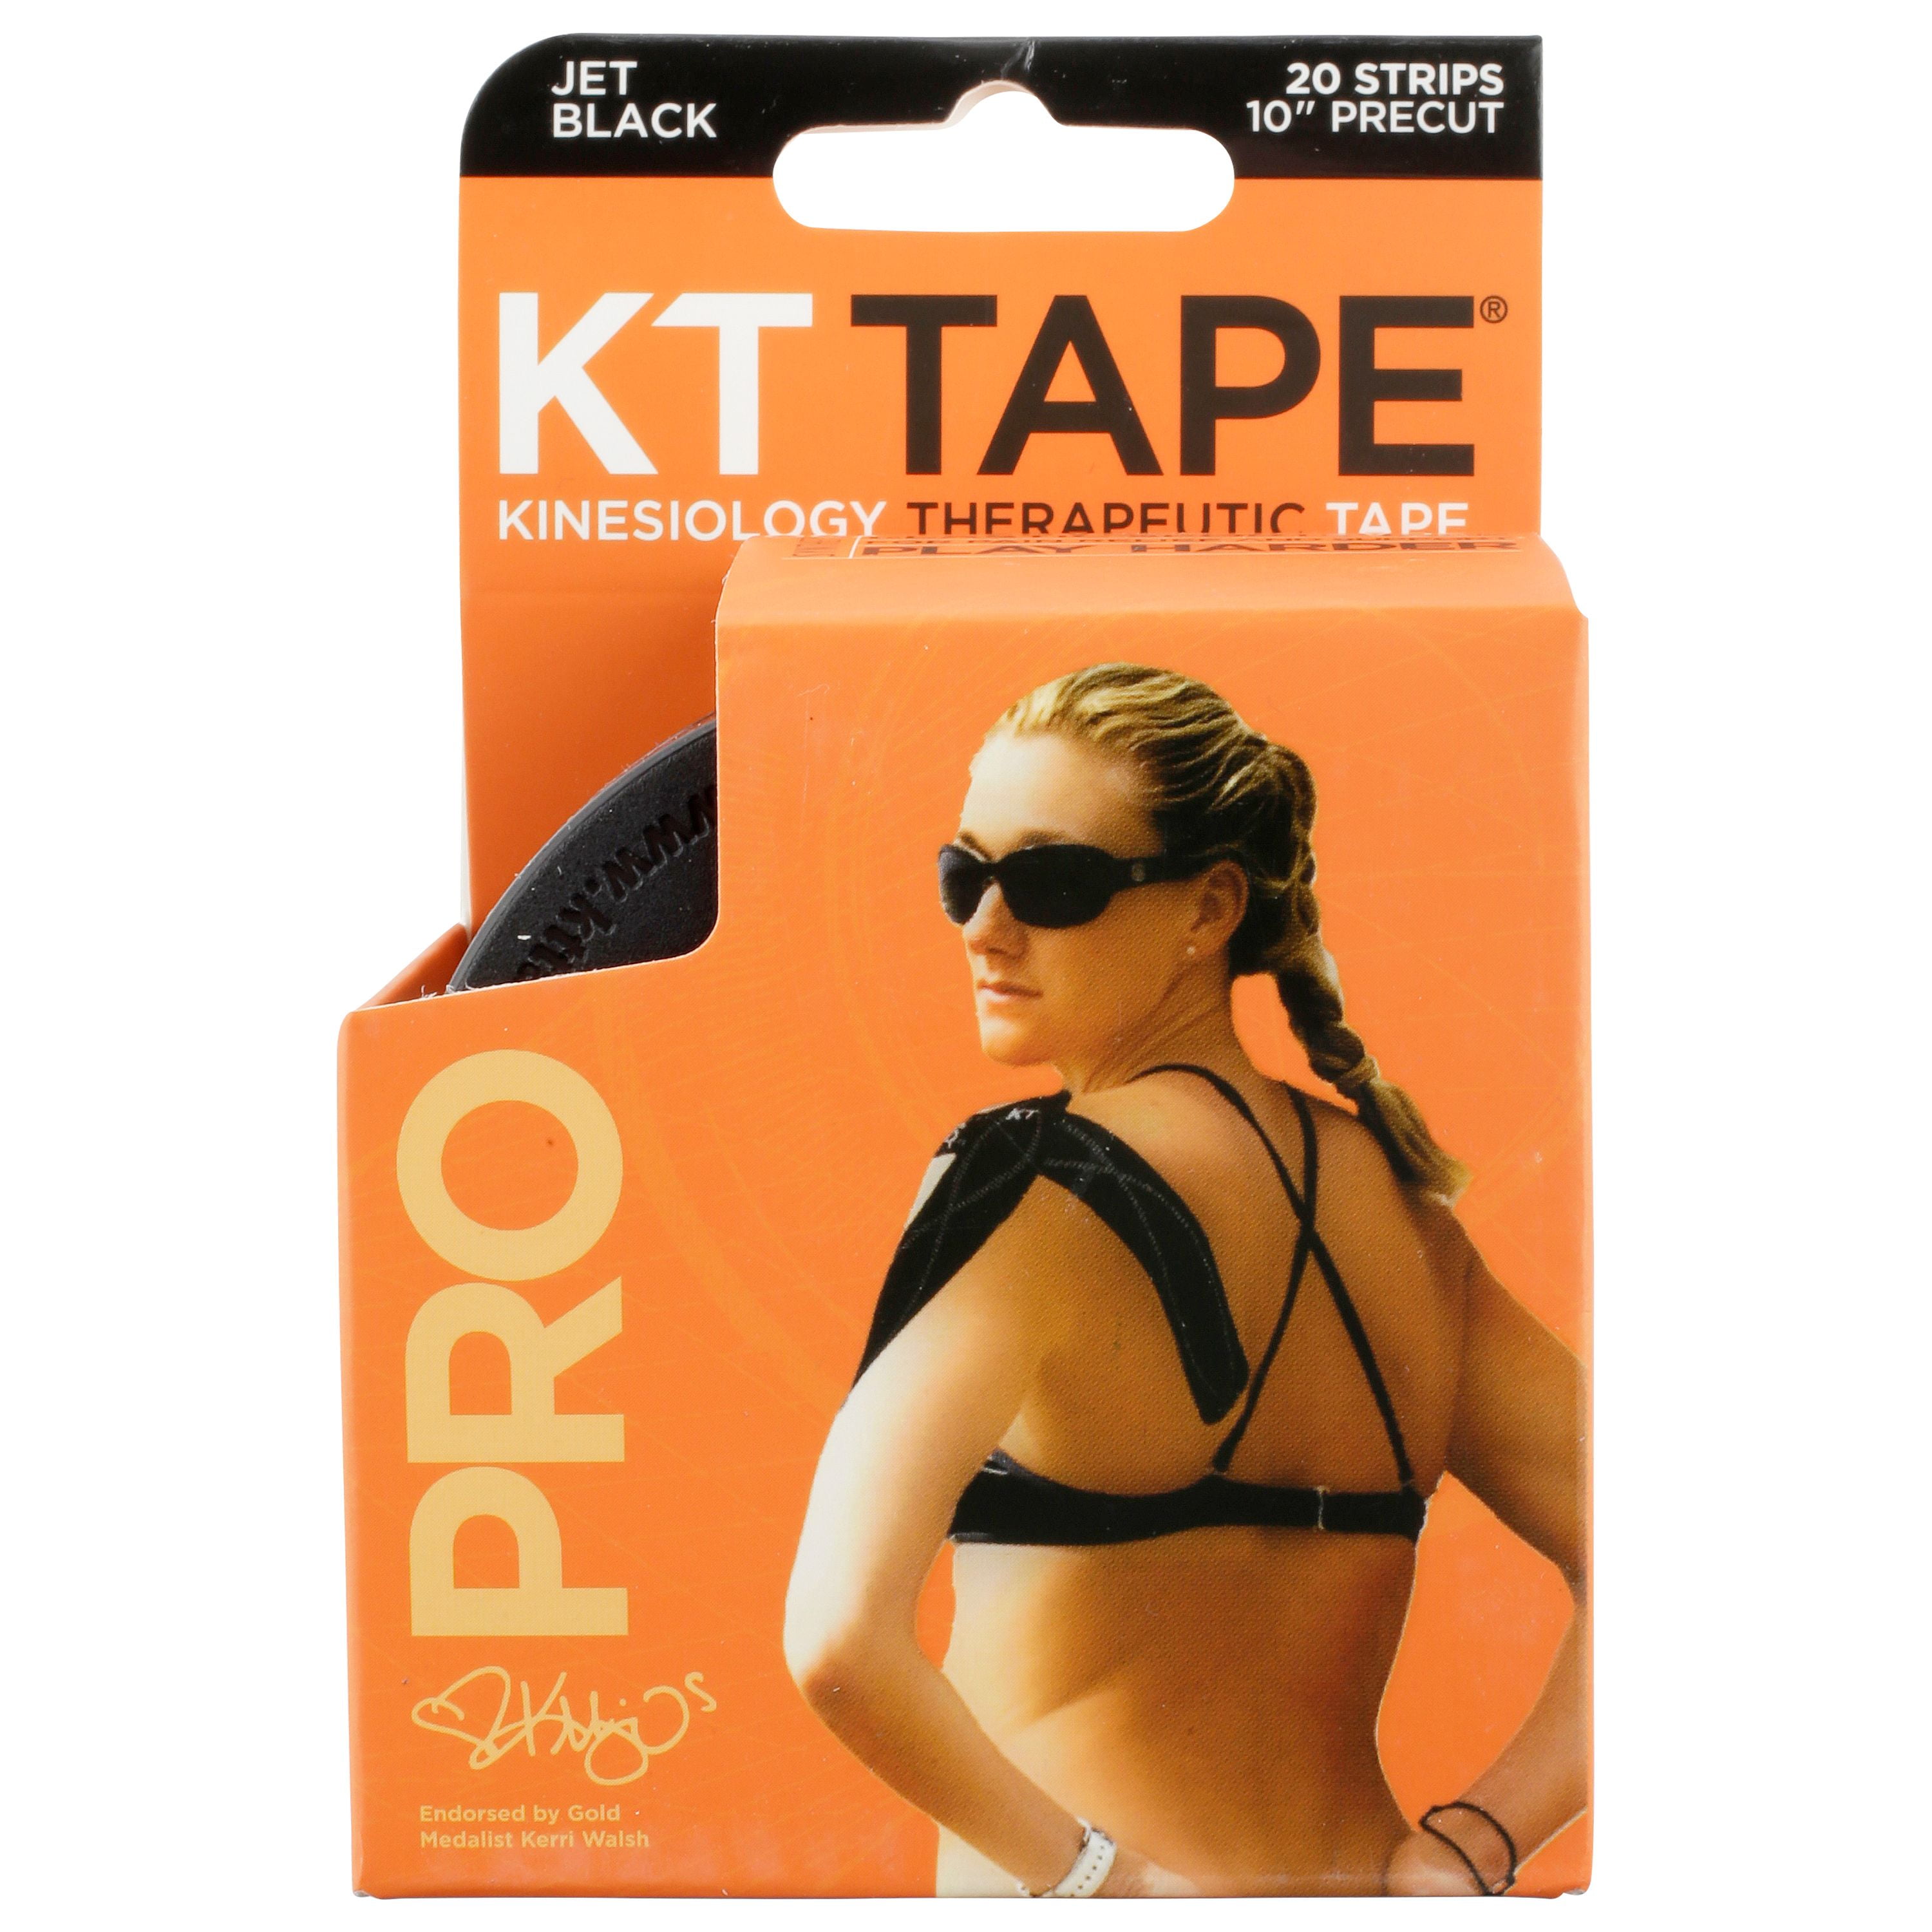 KT TAPE PRO Synthetic Elastic Kinesiology Therapeutic Tape 